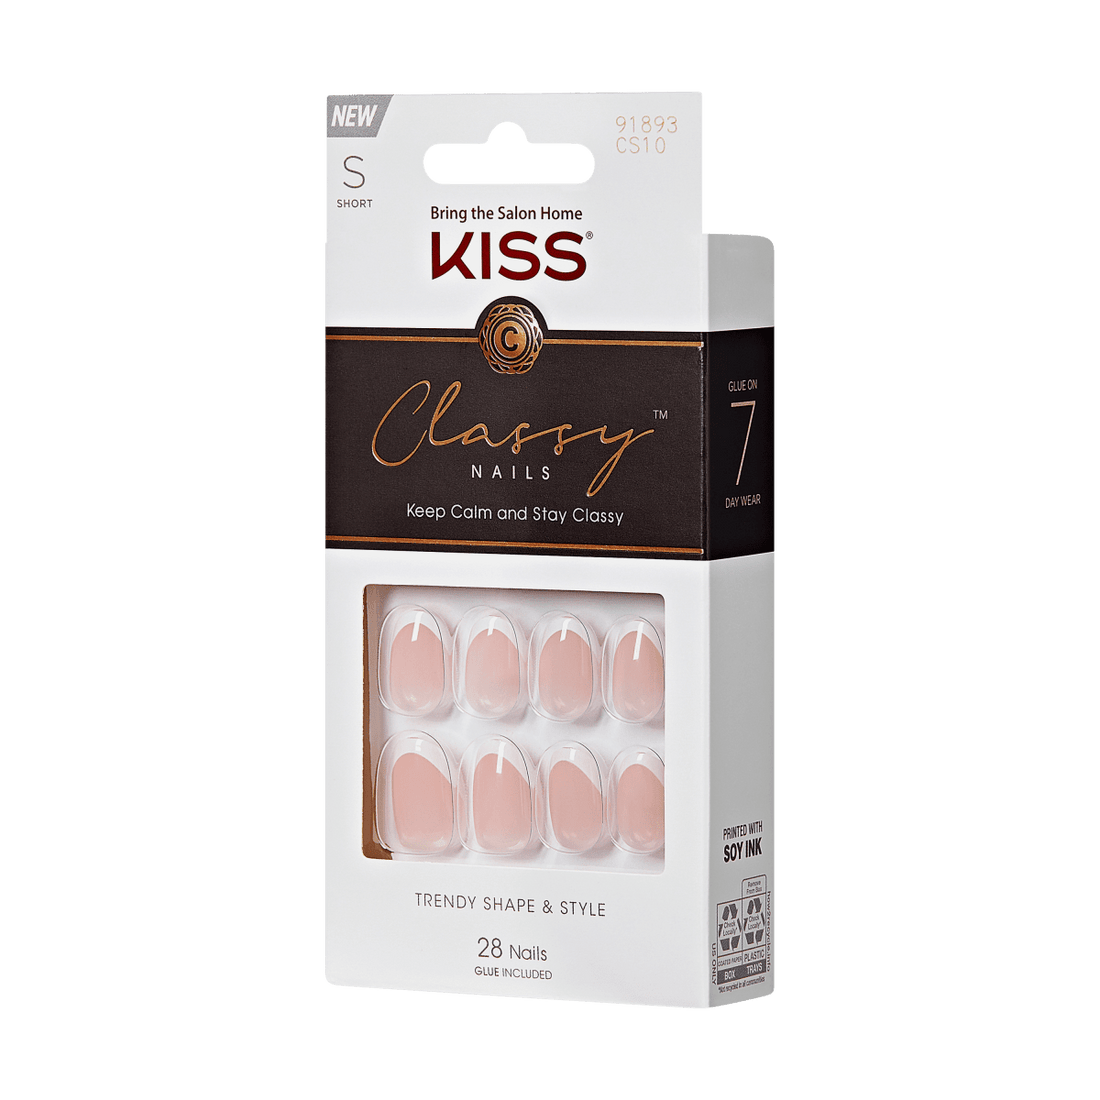 KISS Classy Nails - Exclusive Only